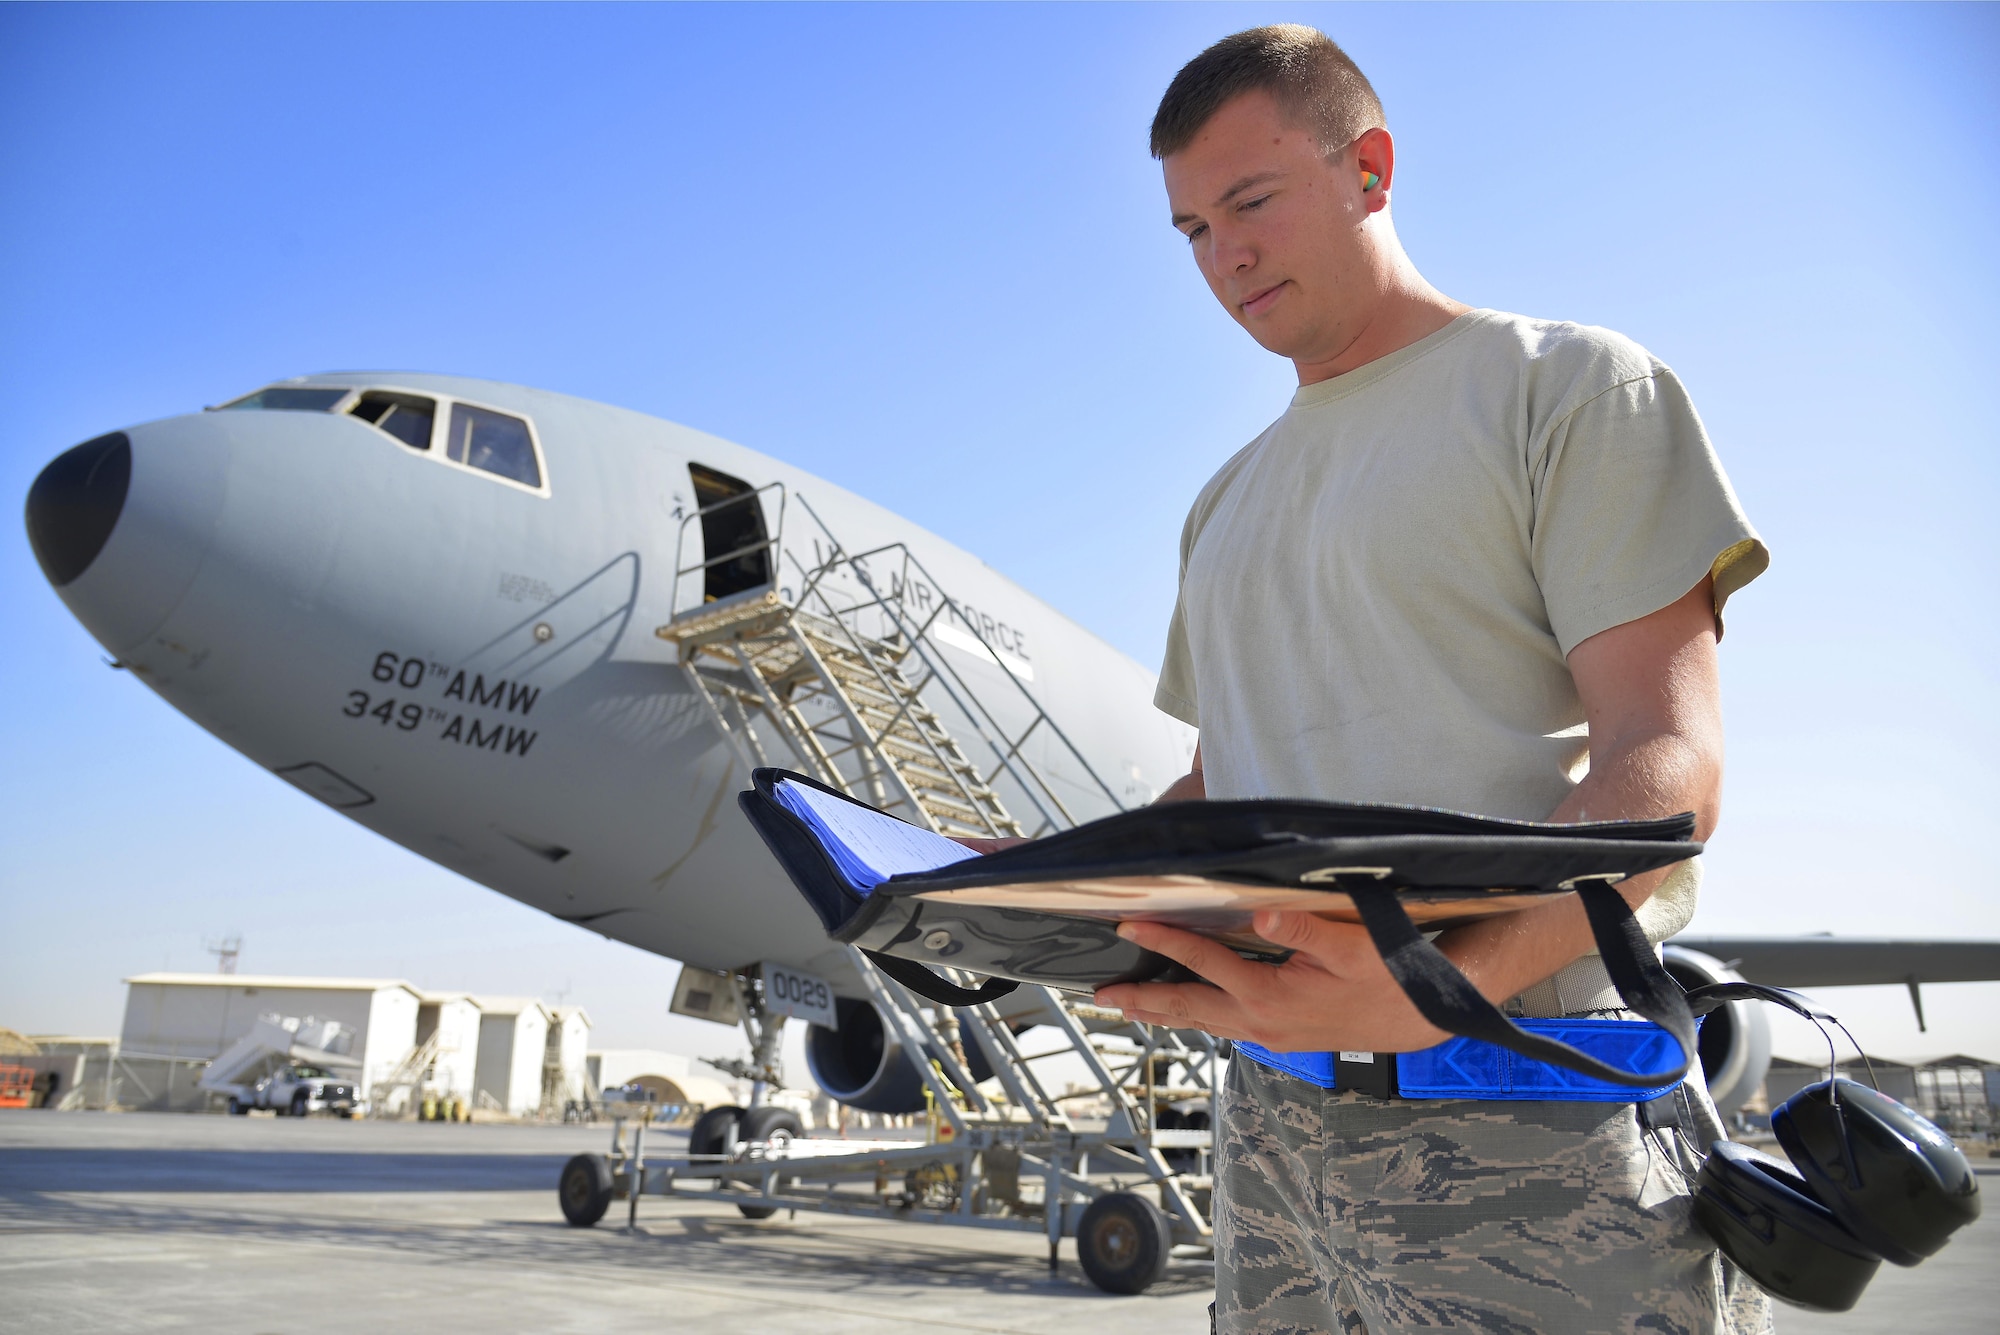 Staff Sgt. Michael reviews an inspection checklist for a KC-10 Extender at an undisclosed location in Southwest Asia May 12, 2015. Michael is a crew chief assigned to the 380th Expeditionary Aircraft Maintenance Squadron. Due to safety and security reasons, last names and unit designators were removed. (U.S. Air Force photo/Tech. Sgt. Christopher Boitz)